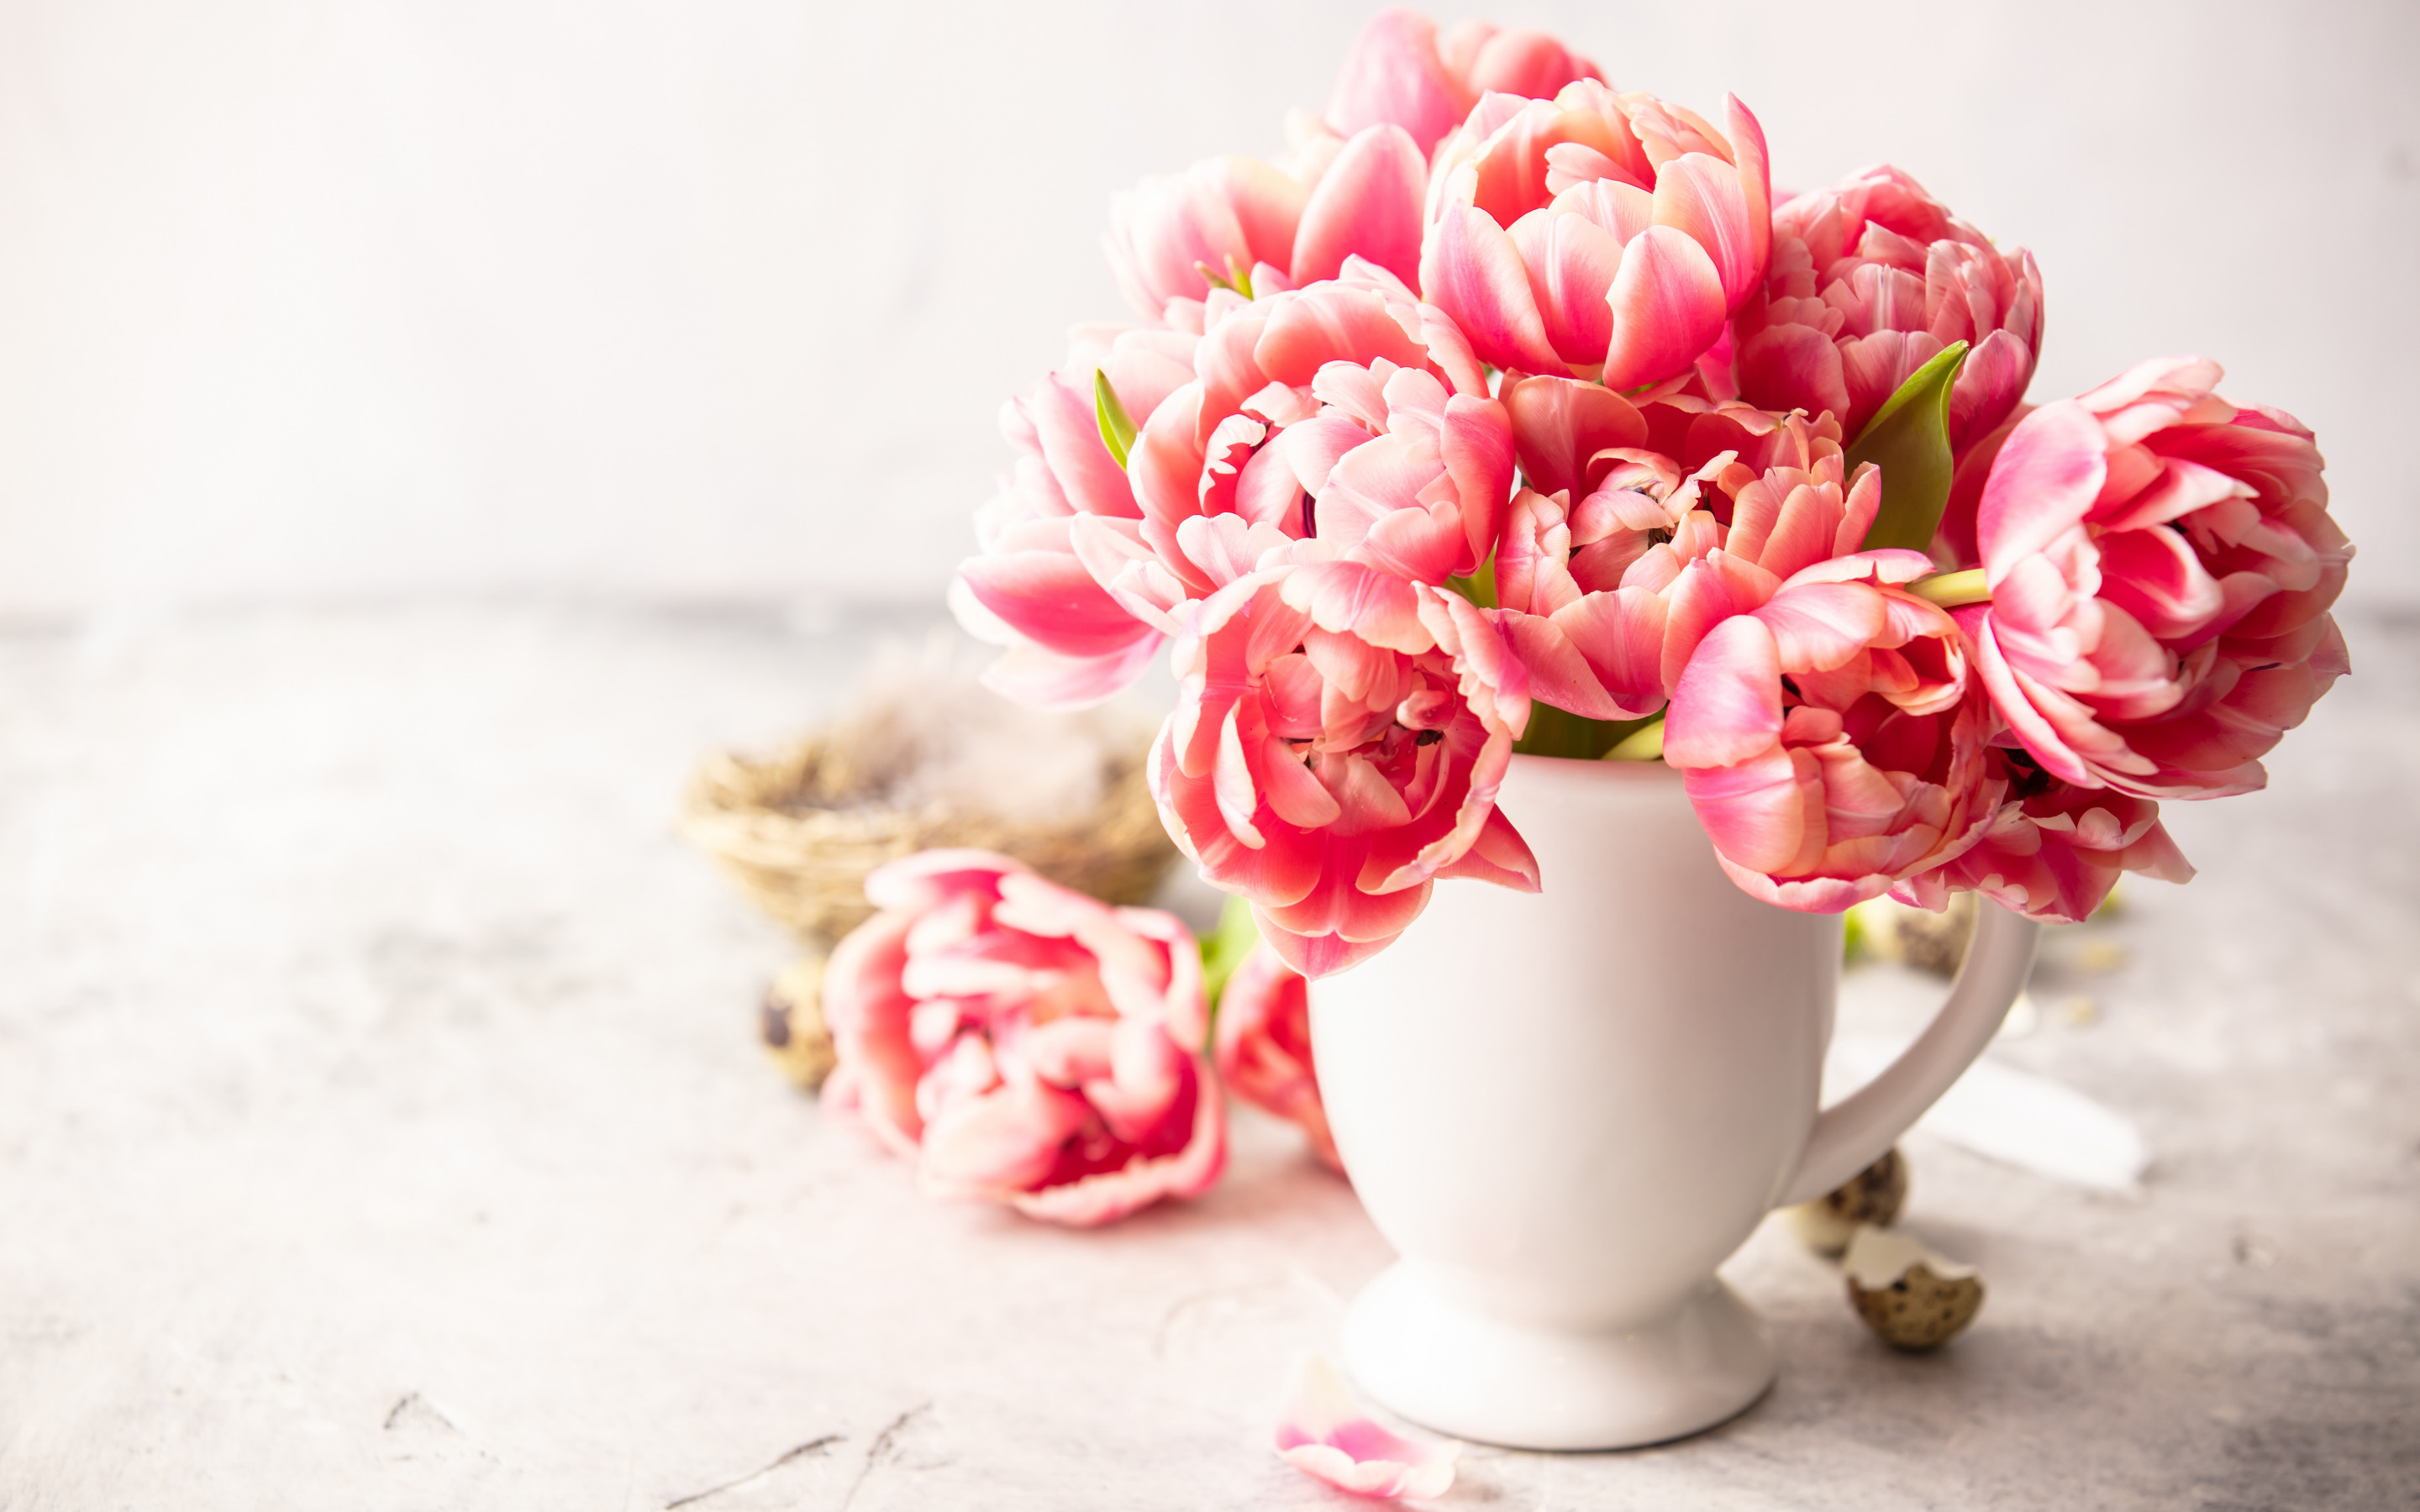 Download wallpaper vase with tulips, spring flowers, tulips, pink tulips, beautiful flowers for desktop with resolution 2880x1800. High Quality HD picture wallpaper